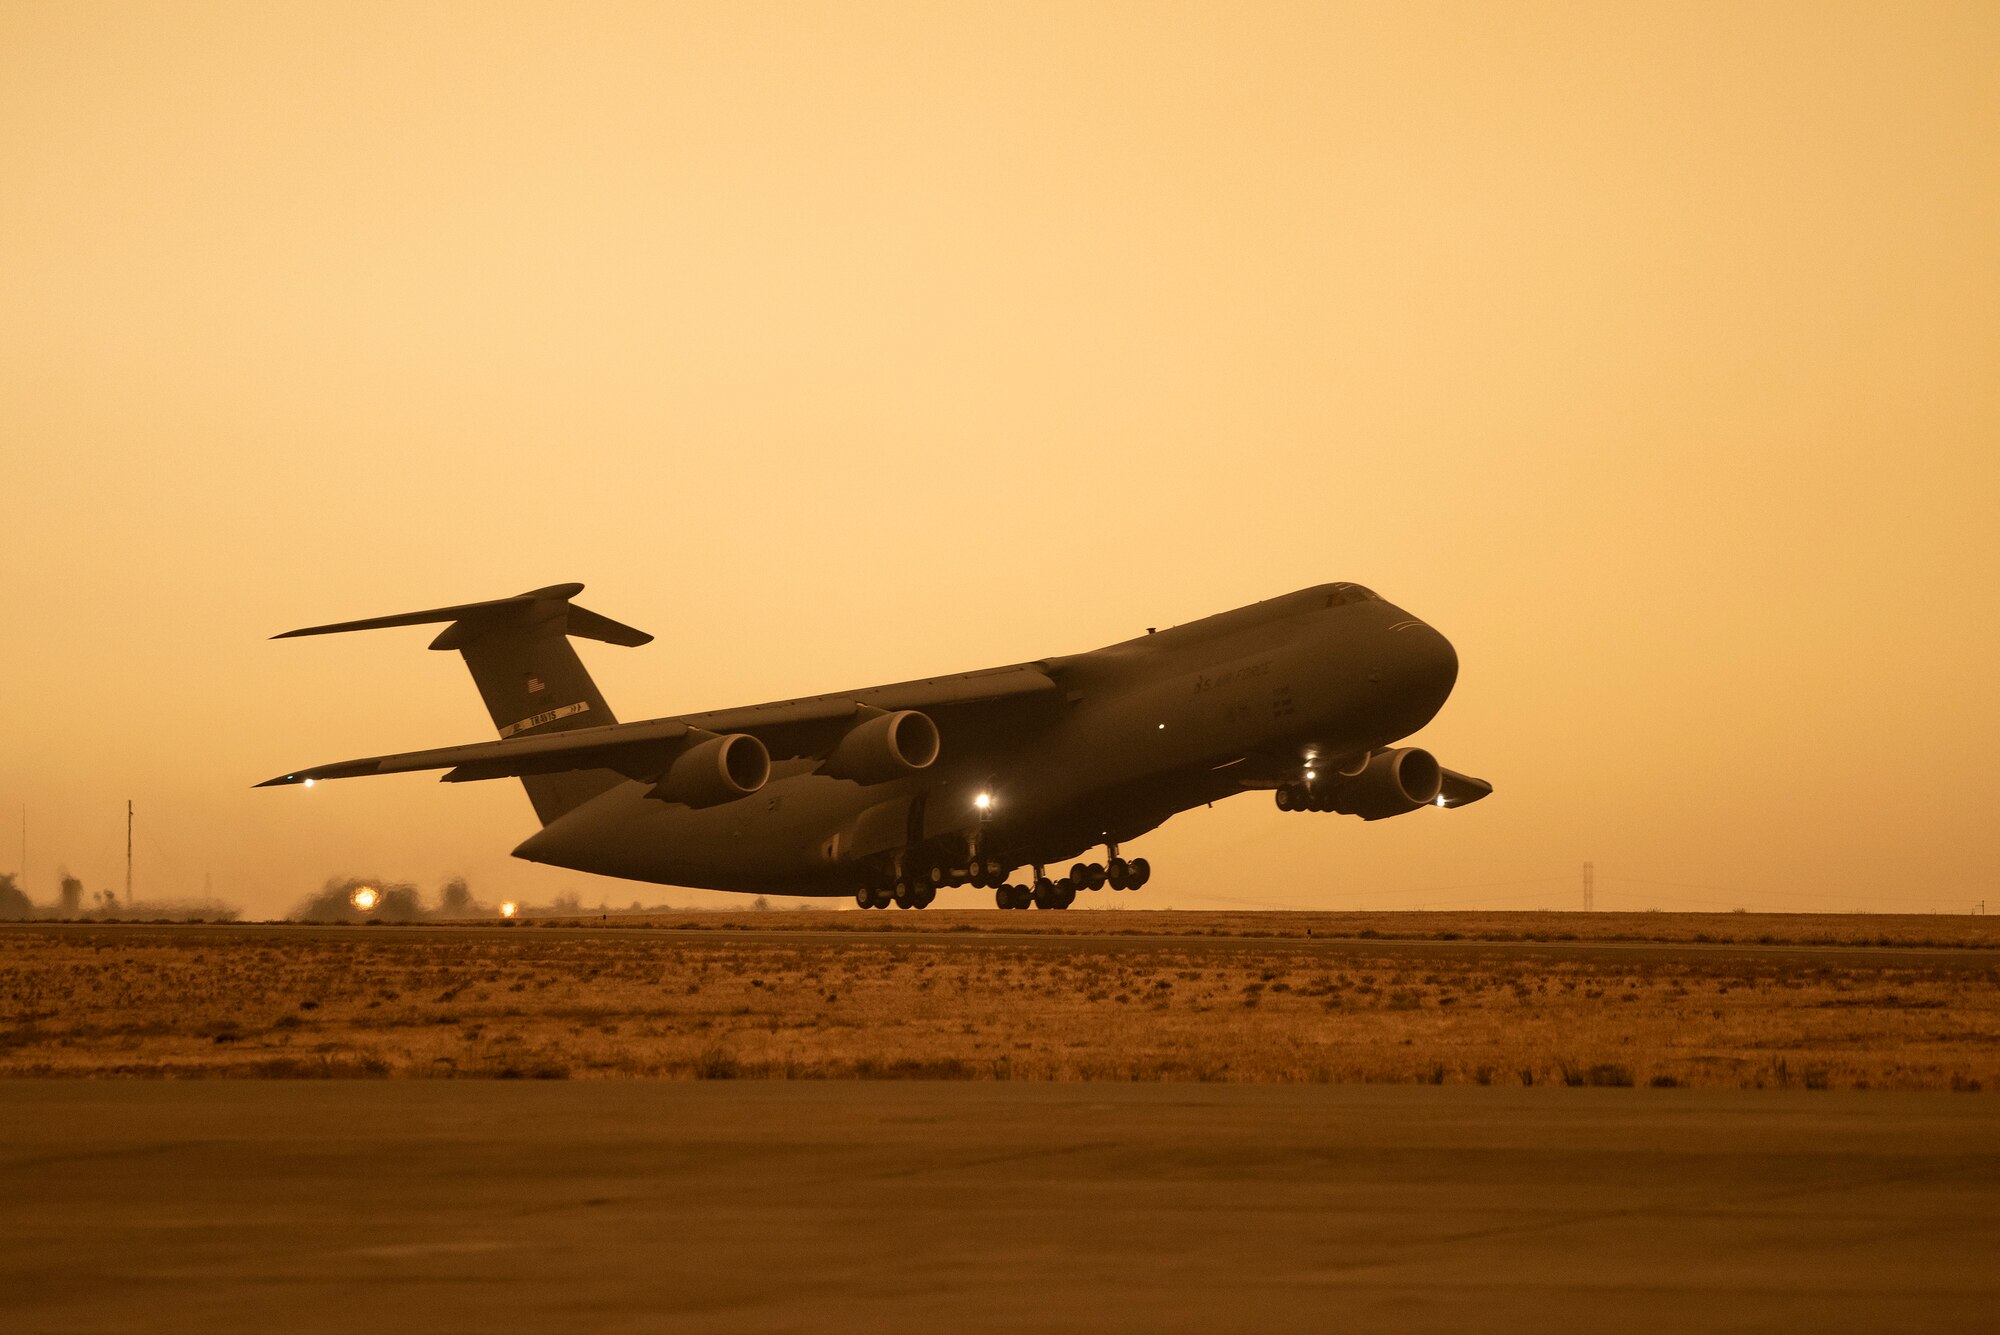 A C-5M Super Galaxy takes off at Travis Air Force Base, California, Sept. 9, 2020. Wildfires across California propelled smoke and ash into the troposphere, impacting air quality. (U.S. Air Force photo by Heide Couch)